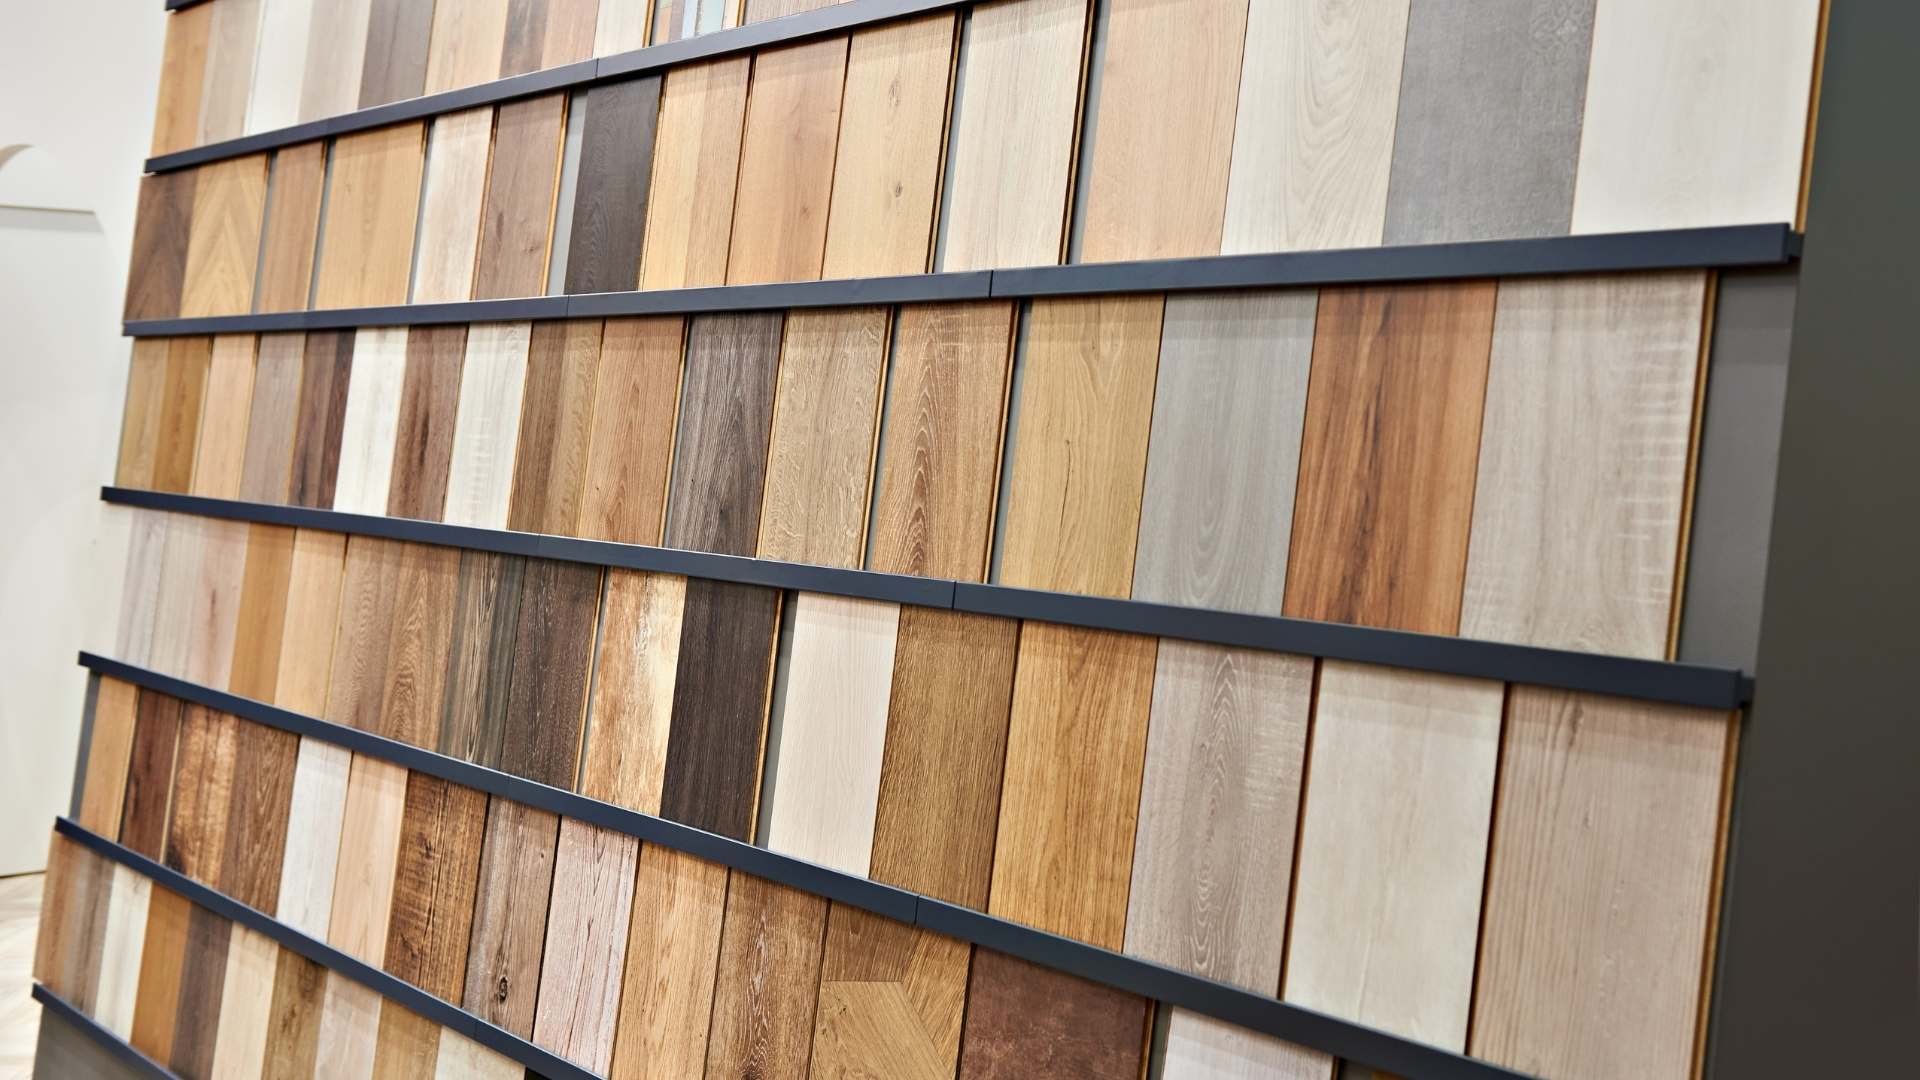 Everything You Wanted to Know About High-Pressure Laminates